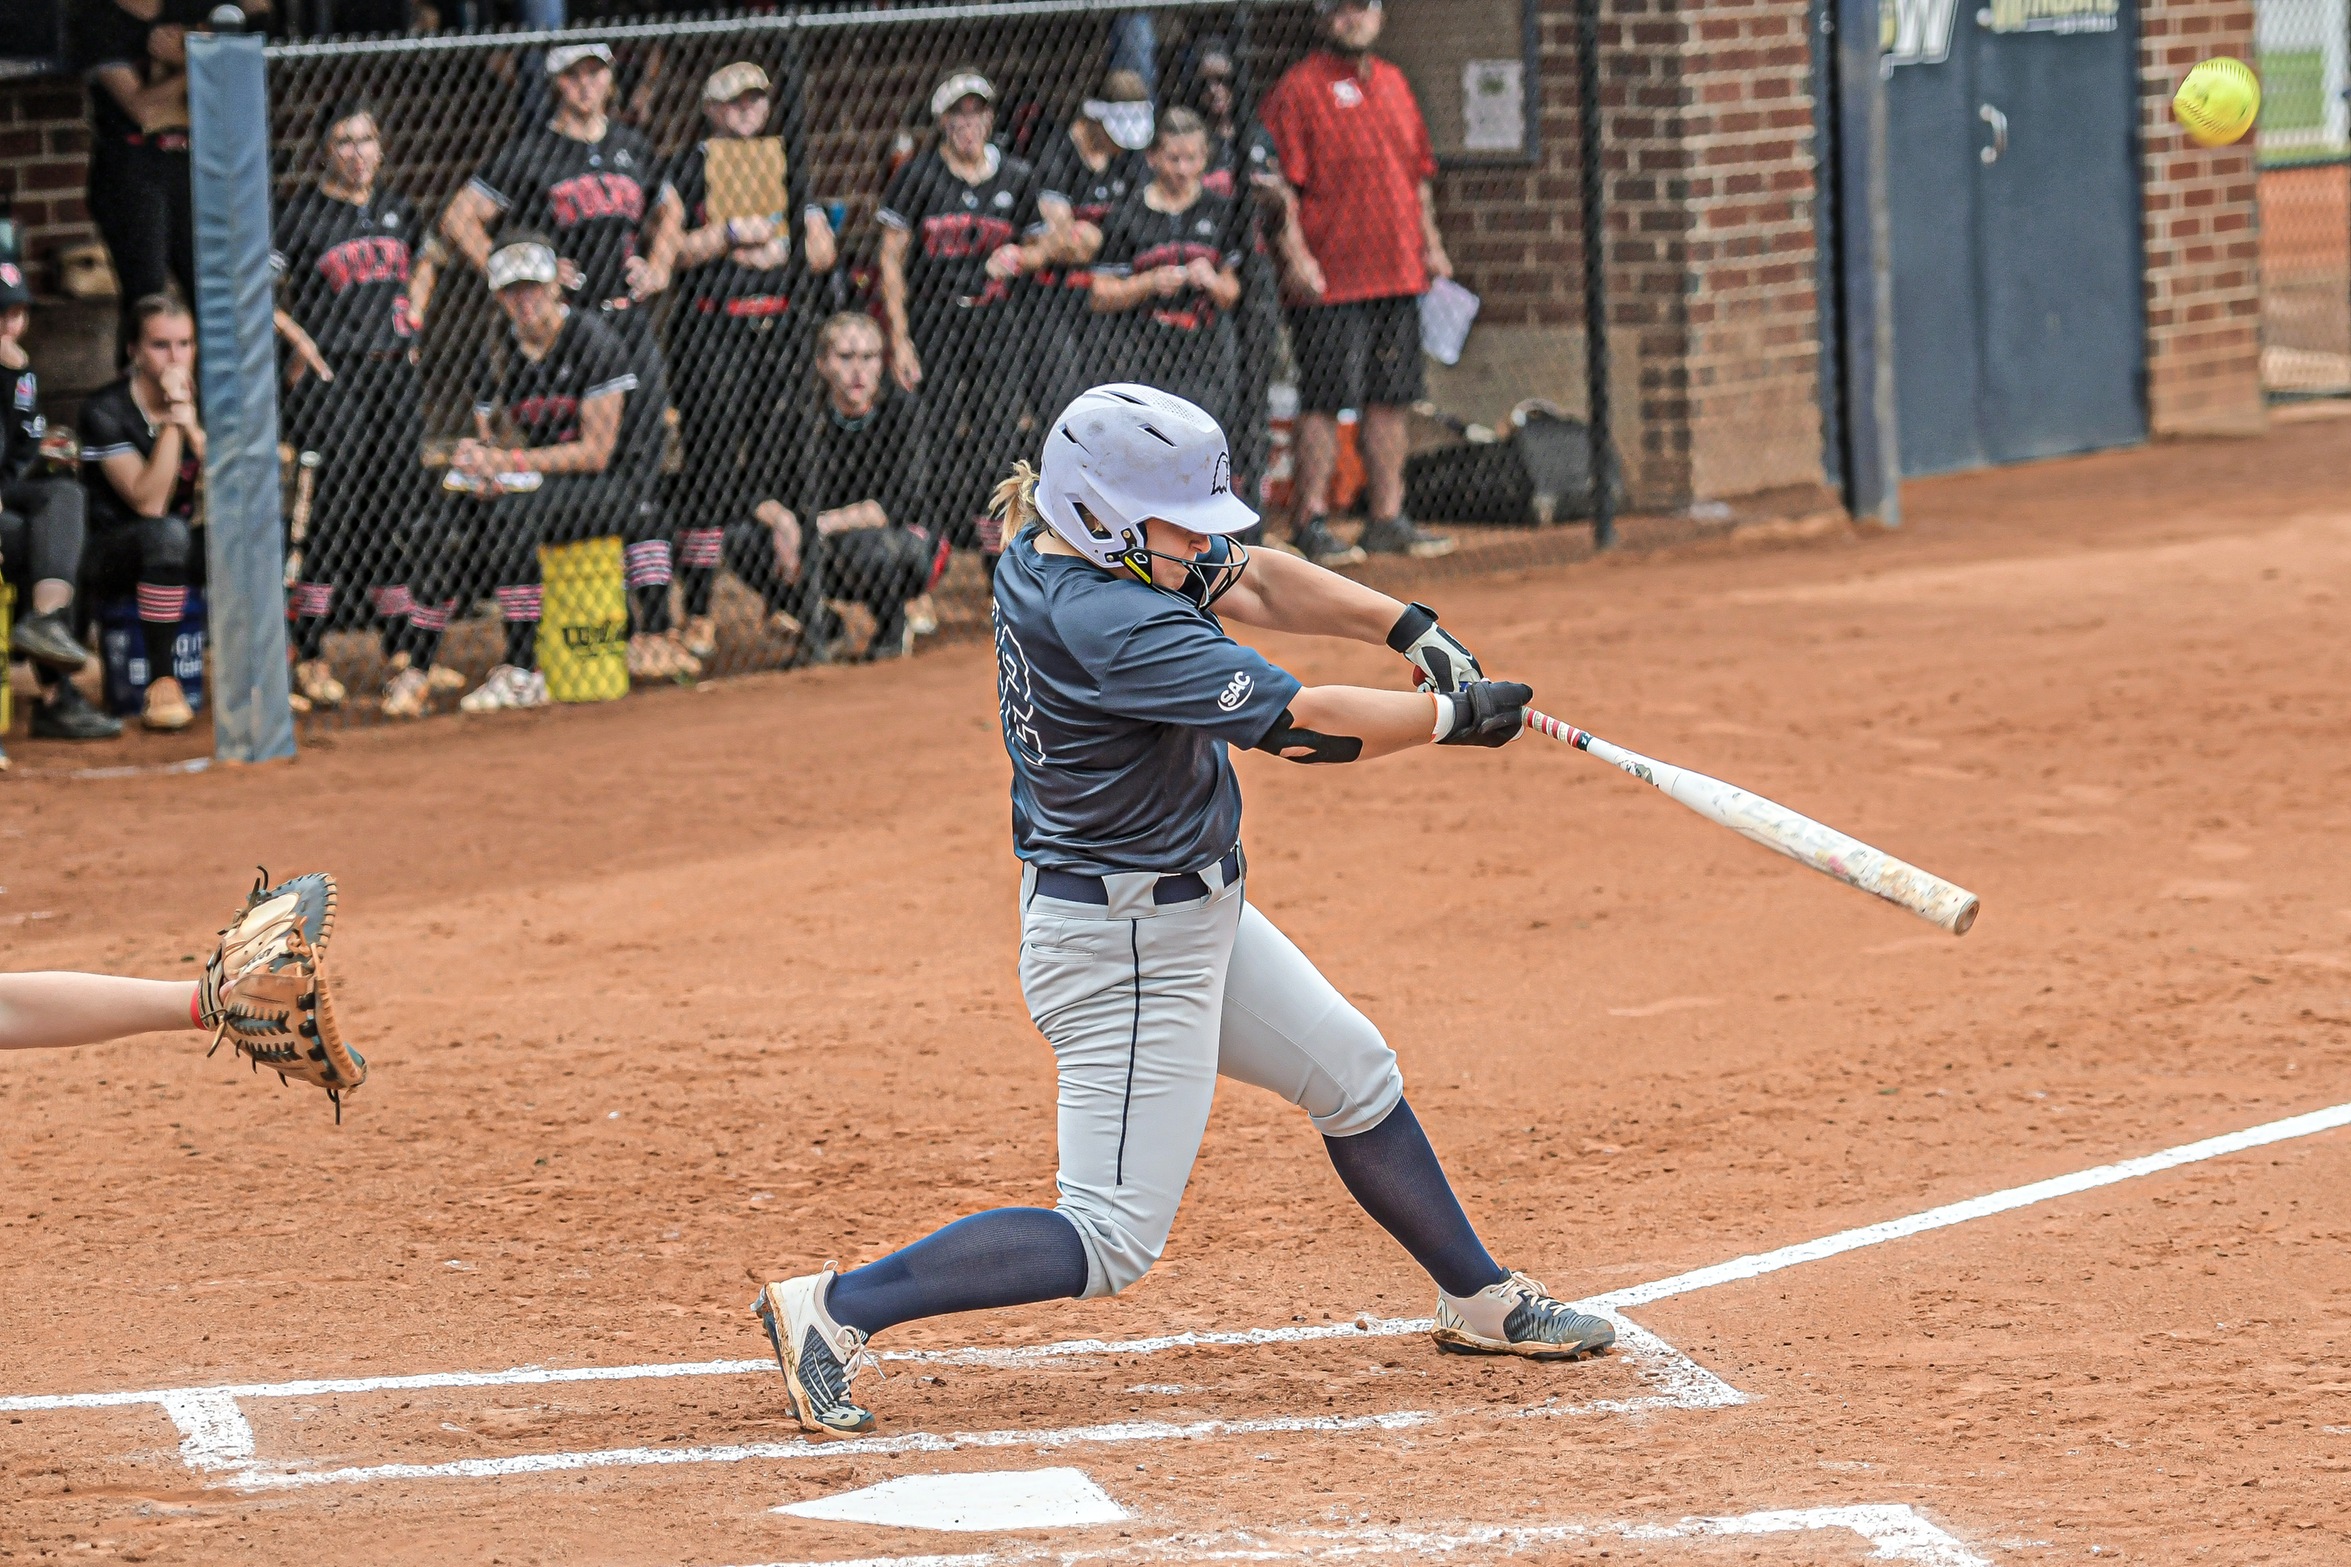 Eagles run out of gas on third game of the day, fall to No. 16 Wingate